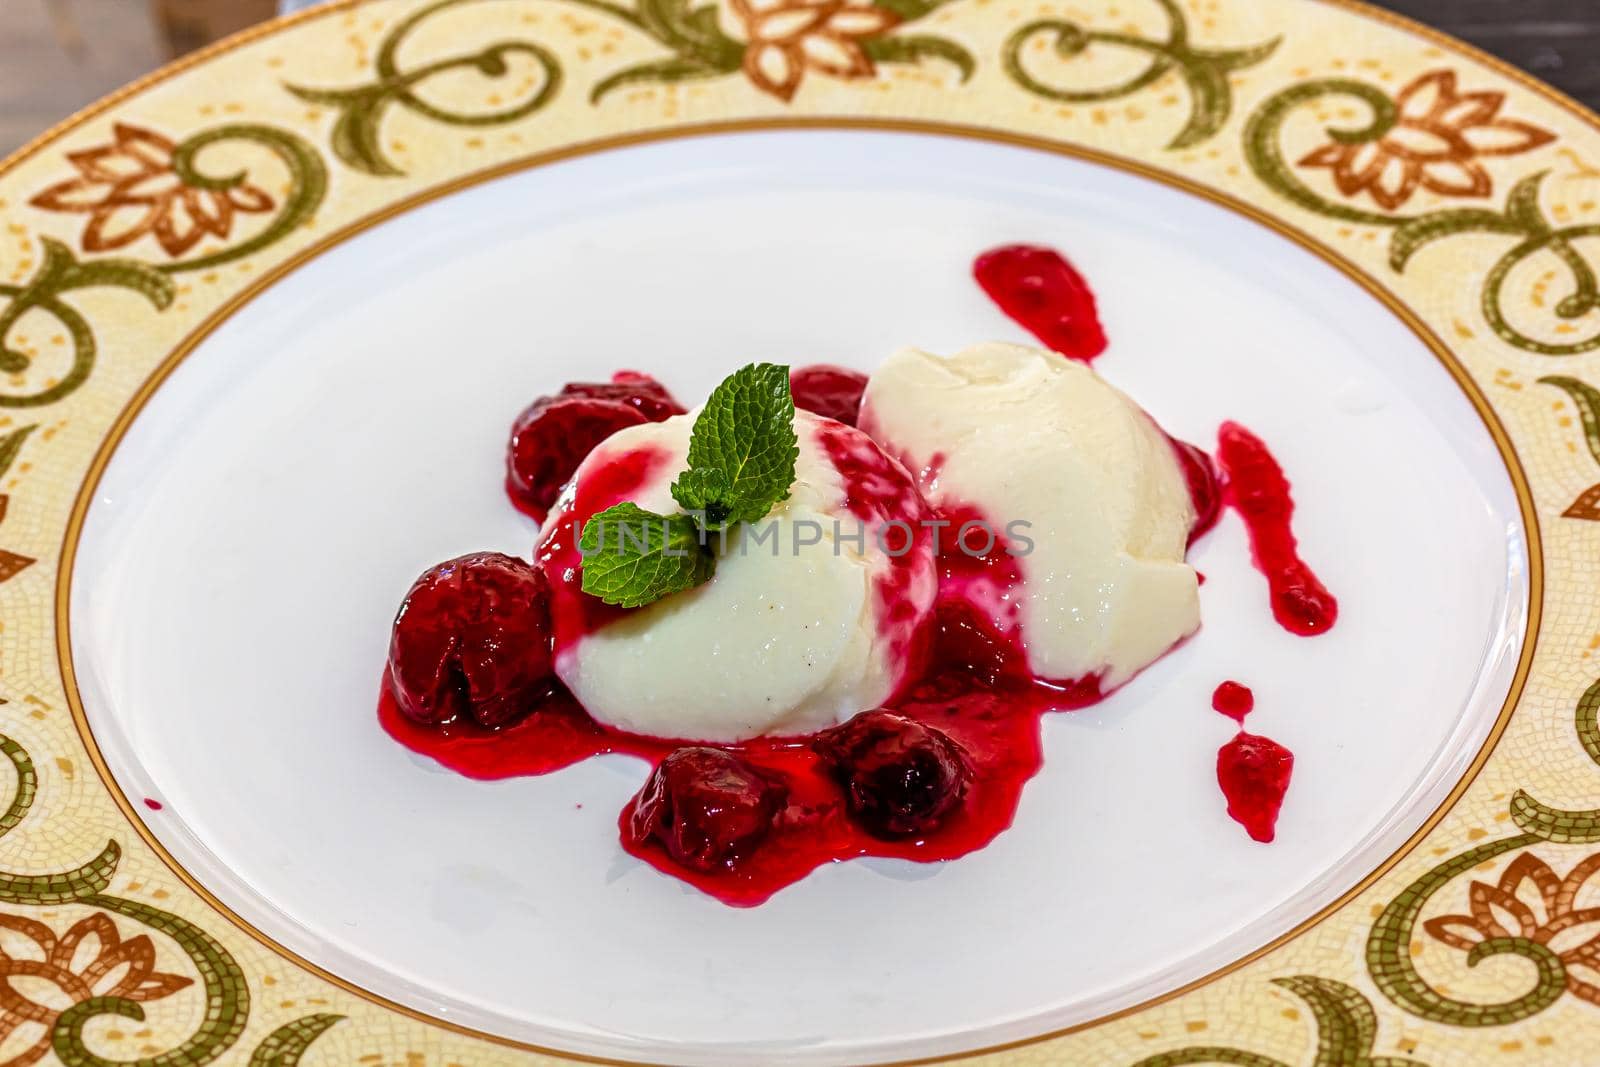 Panakota with cherry jelly and mint leaves on a white background.